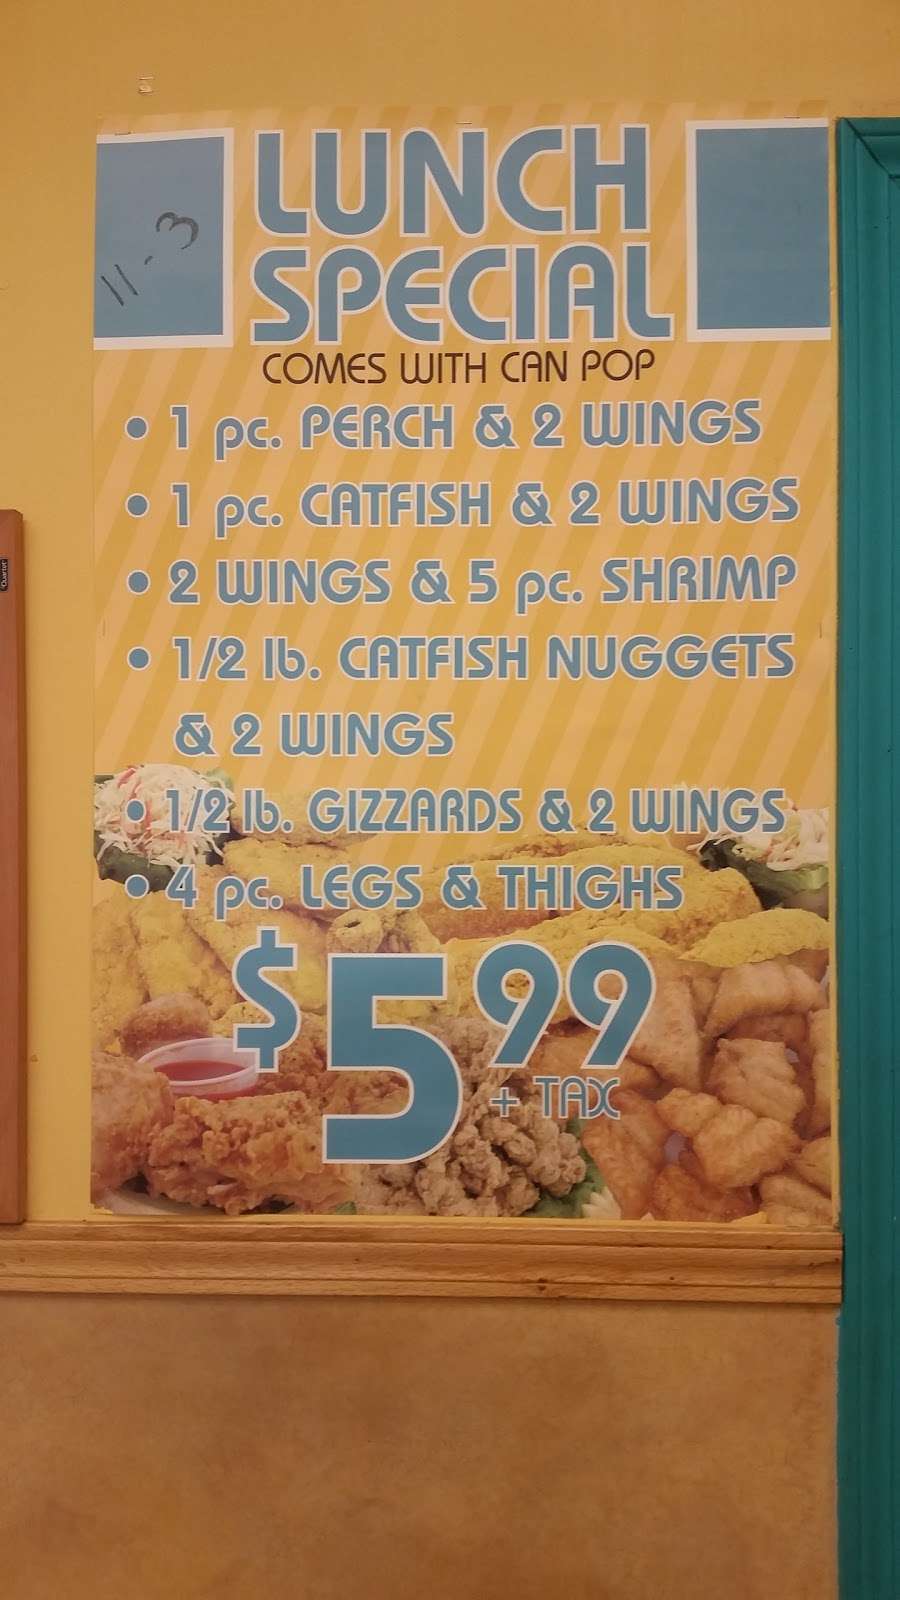 Sharks Fish and chicken | 511 Vermont St, Gary, IN 46402 | Phone: (219) 881-9100